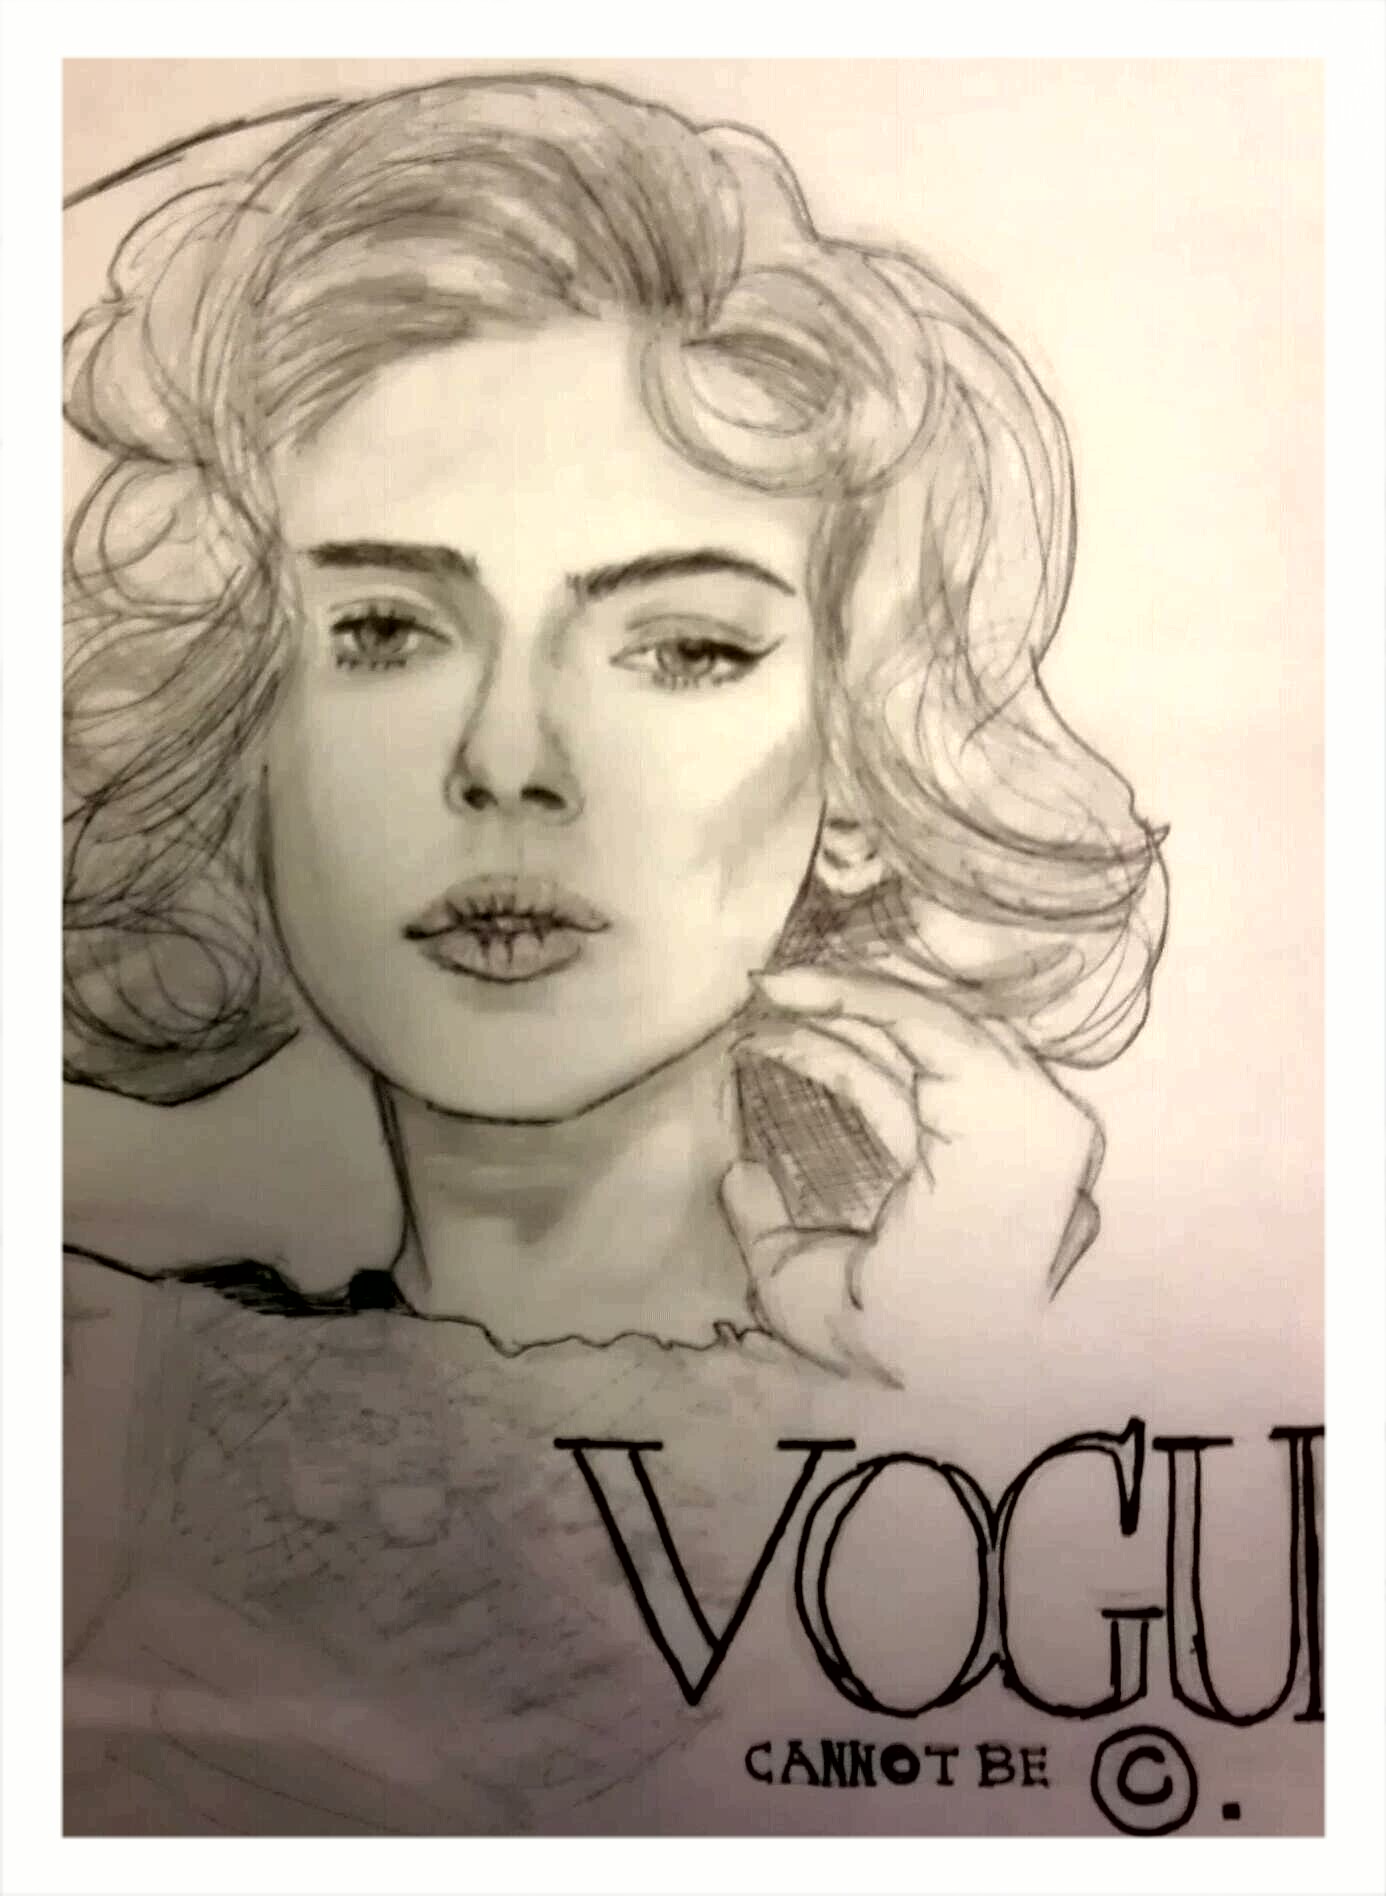 Vogue cannot be copyrighted